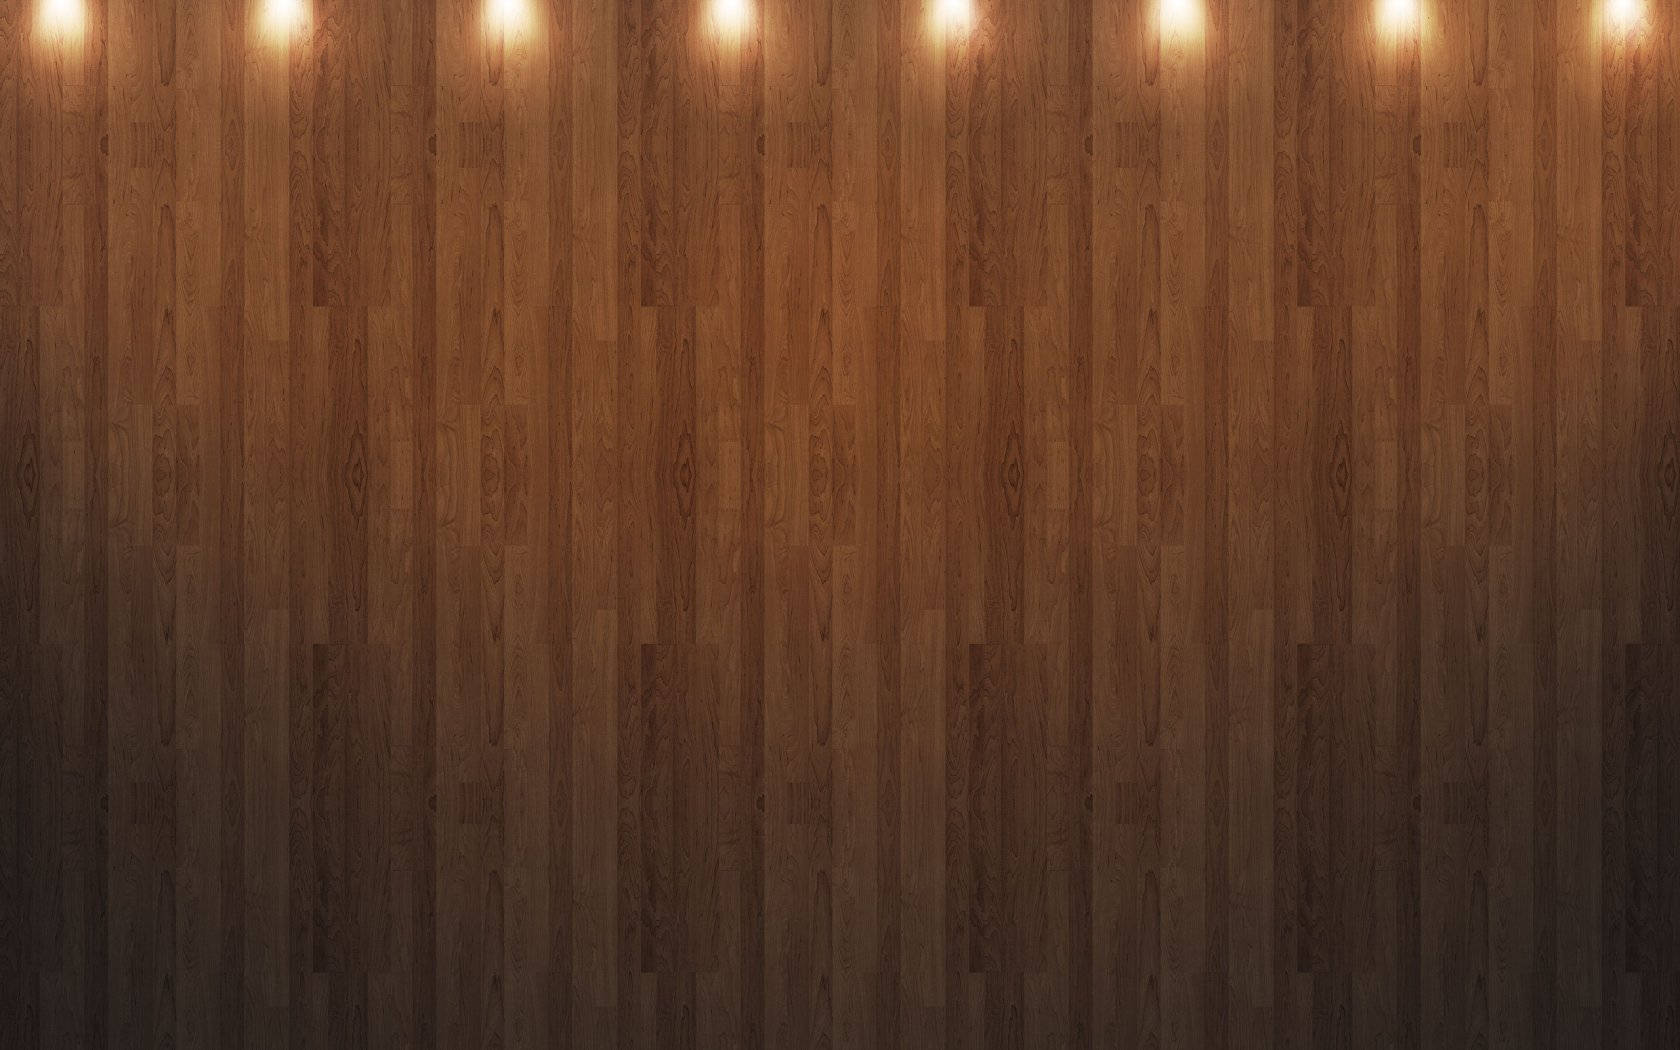 Hd Wood With Fairy Lights Background